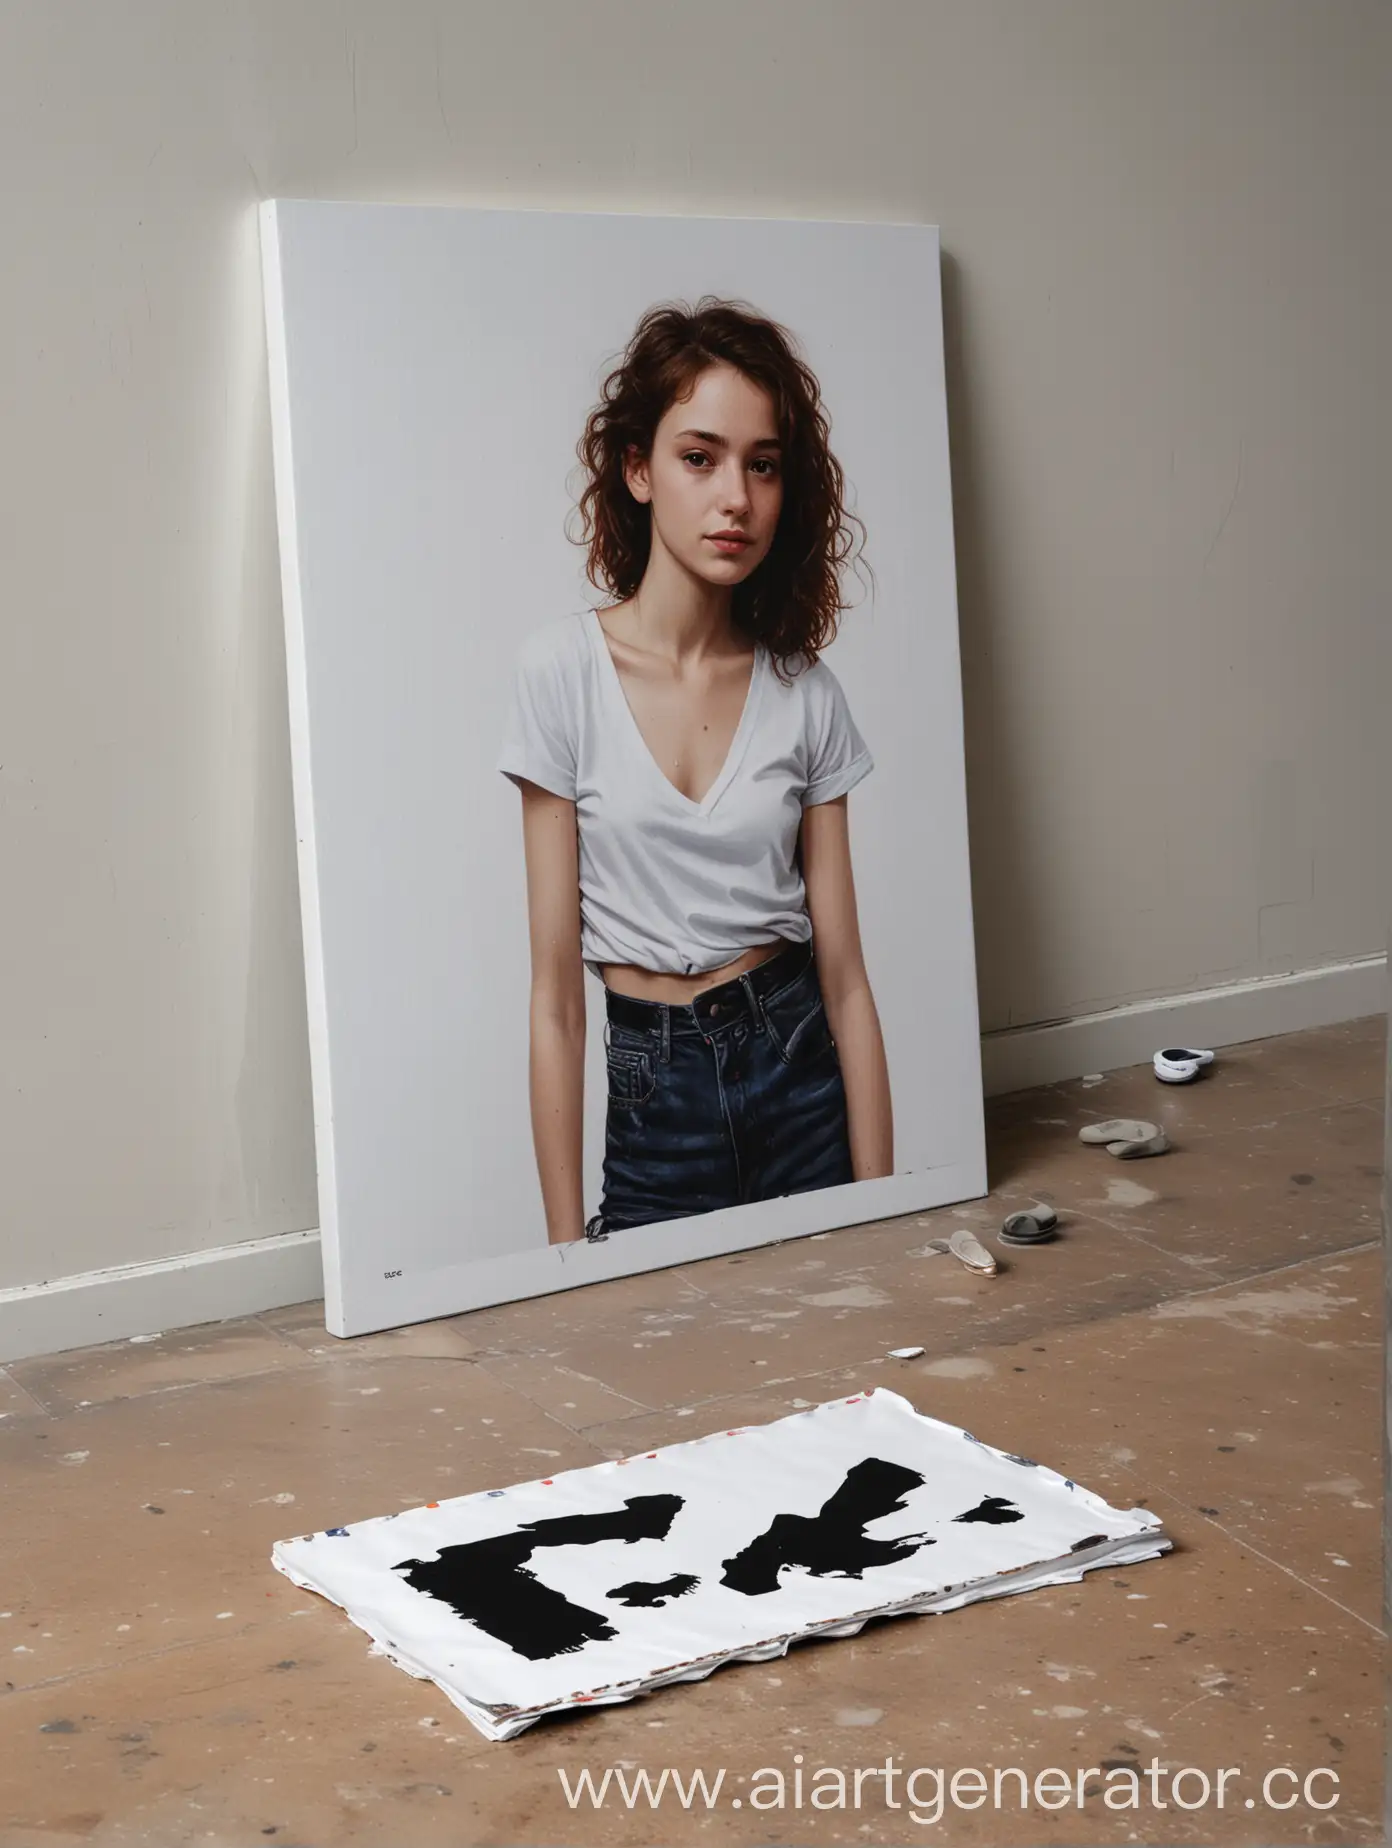 A portrait on canvas measuring 50x70 cm stands on the floor next to the ps5